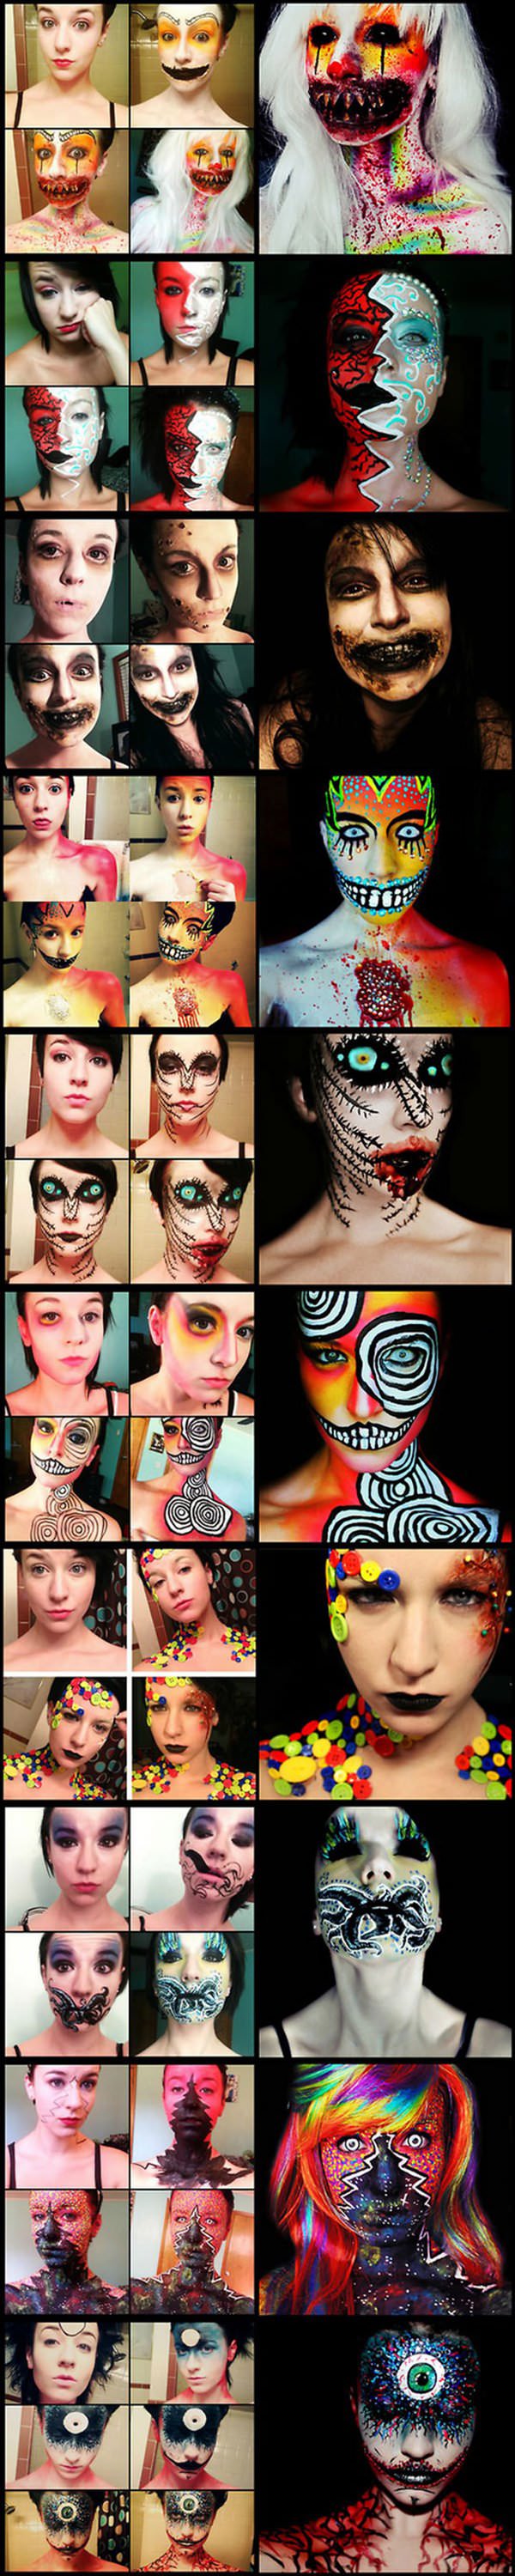 Cool Makeup Art funny picture